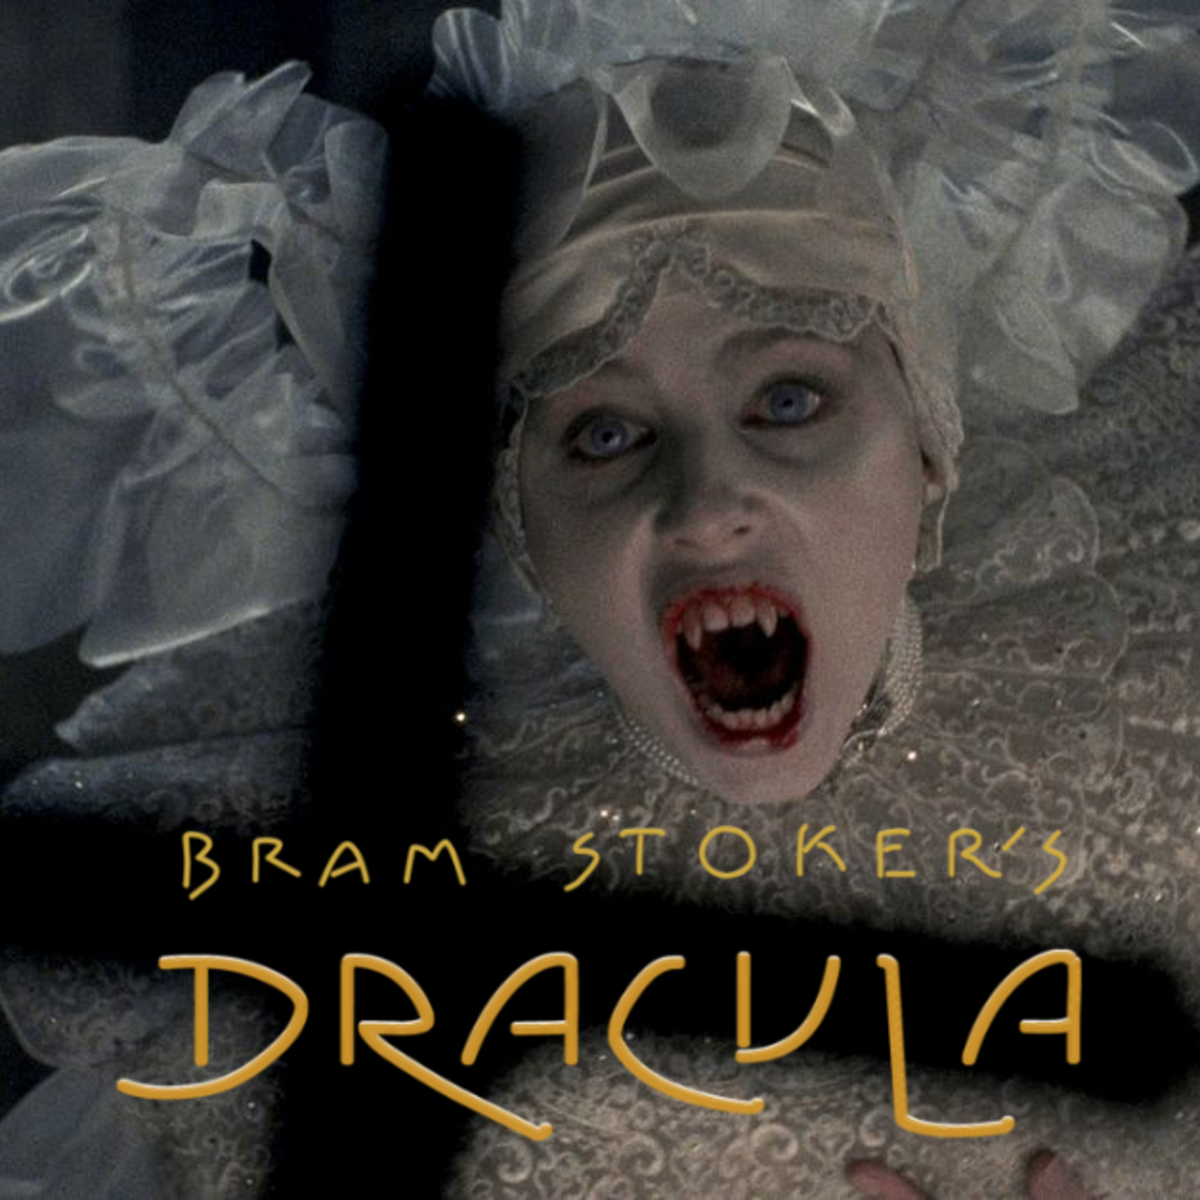 Coppola's intriguing twist on the horror tale of Dracula.